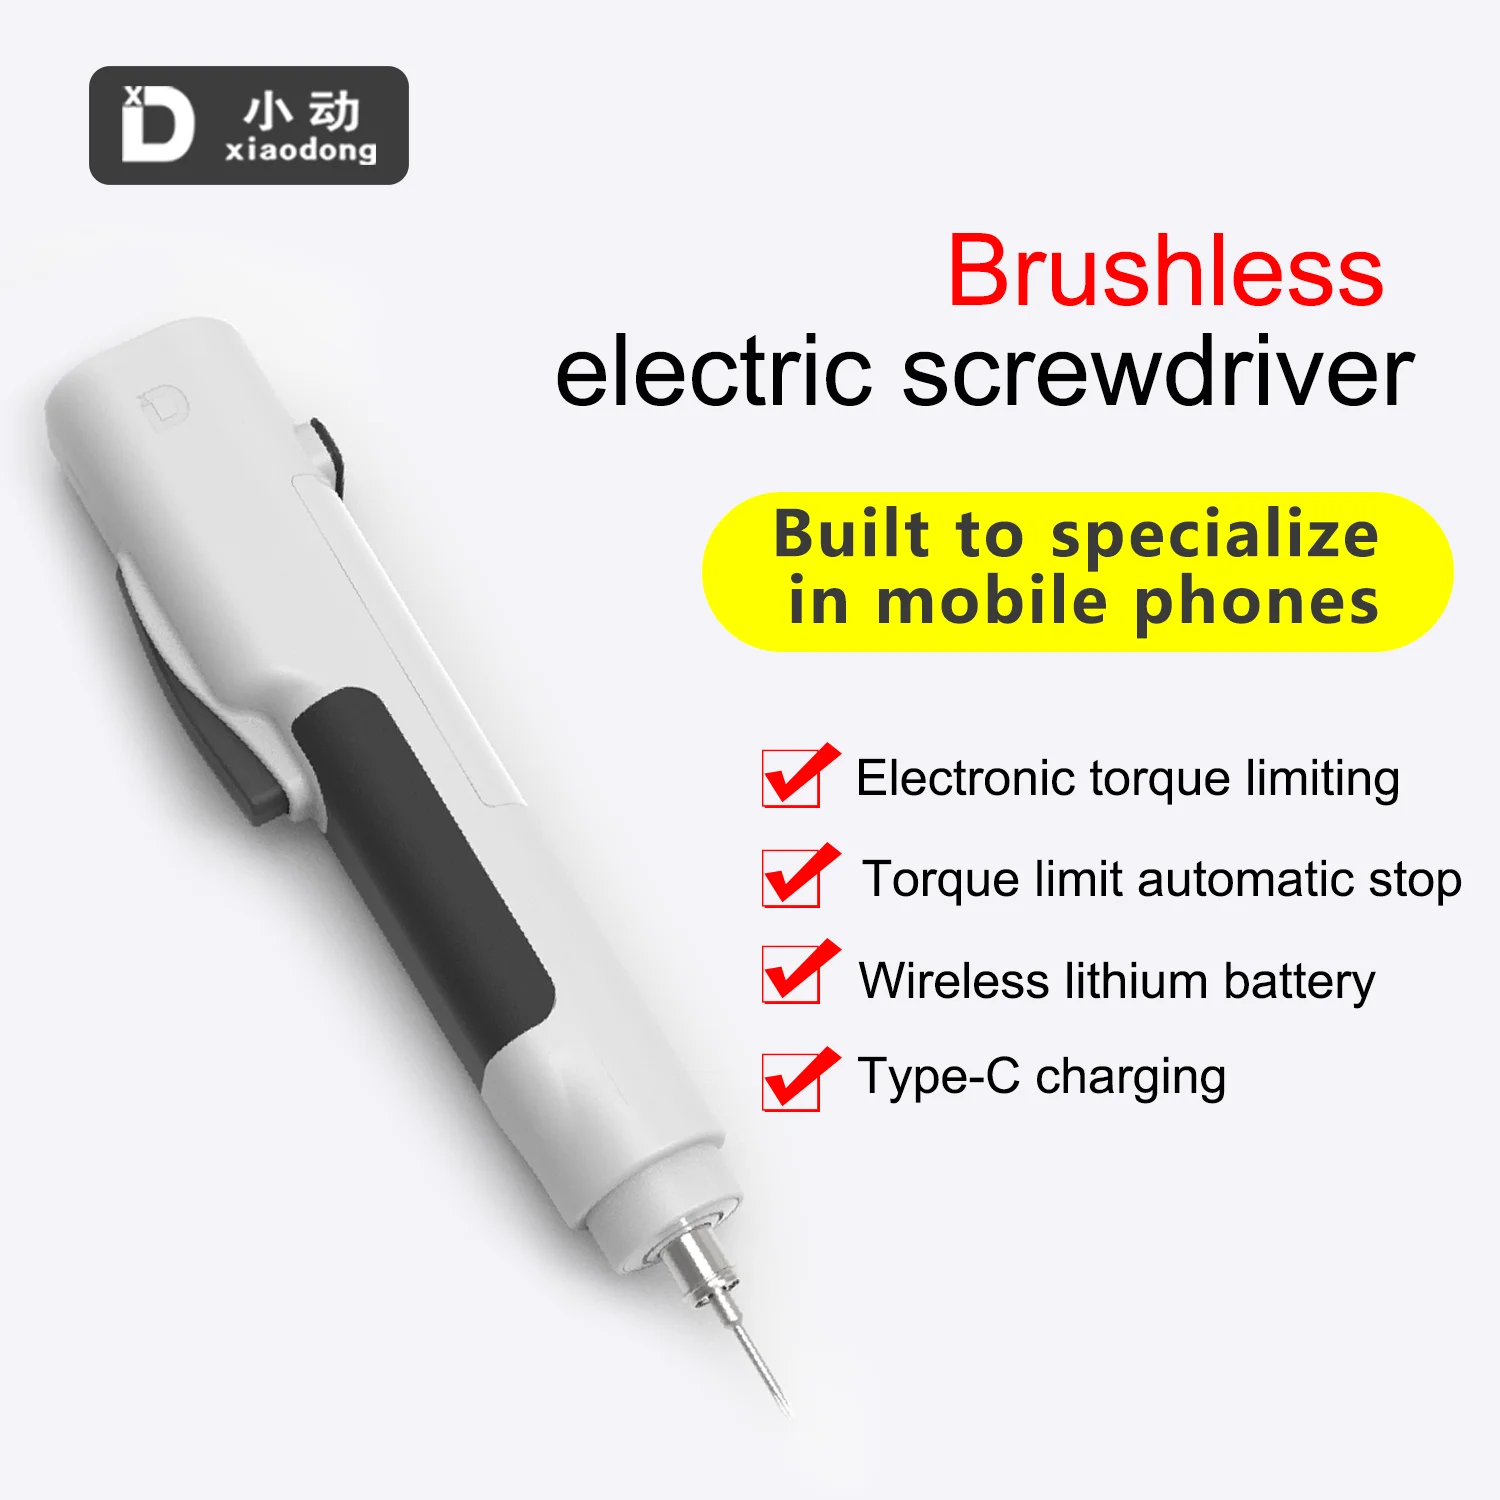 Xiaodong P1 Electric Screwdriver Professional Disassembly Tool for IPhone Android Huawei Phones Tablets Repair Opening Tools bst 001 stainless steel metal pry bar suitable for iphone android phone screen back cover disassembly tool